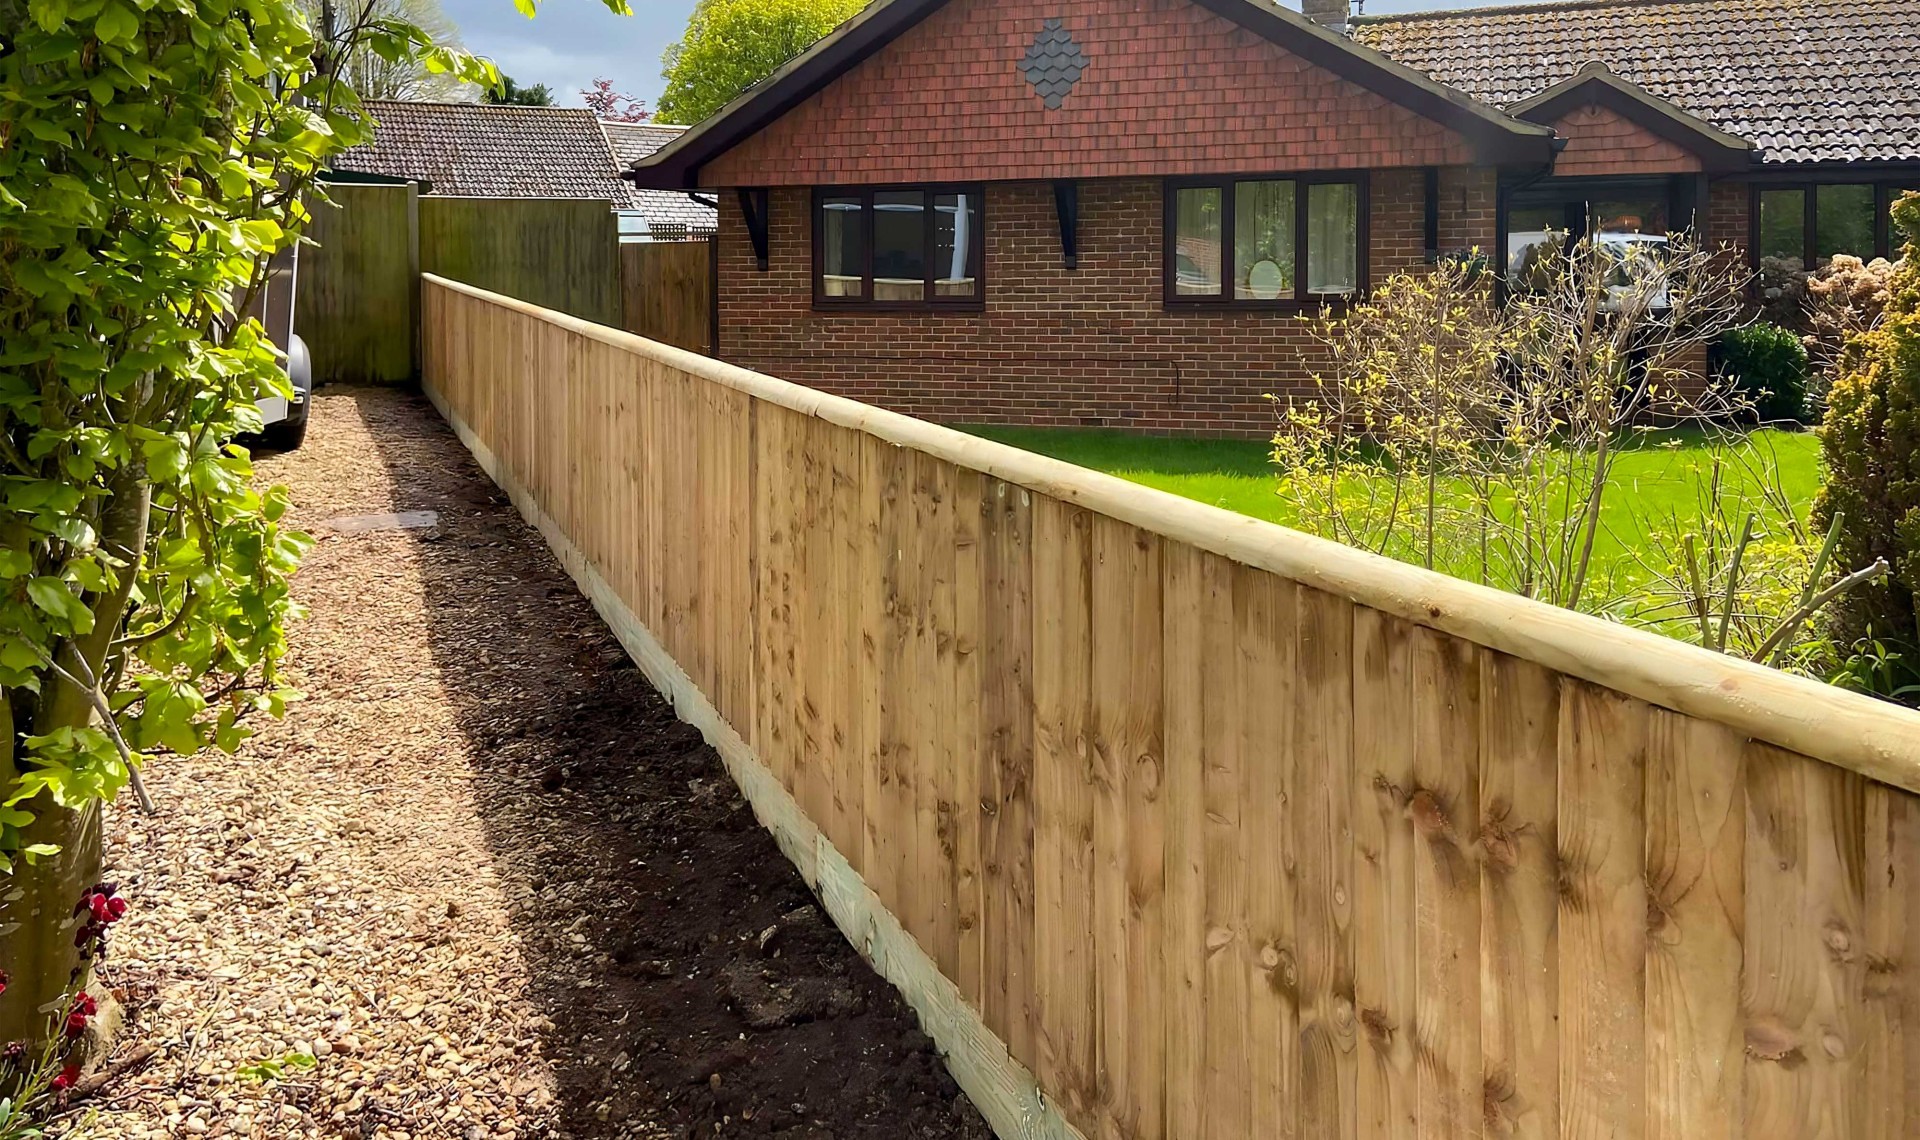 Small closeboard fence along the side of a garden with property in background.